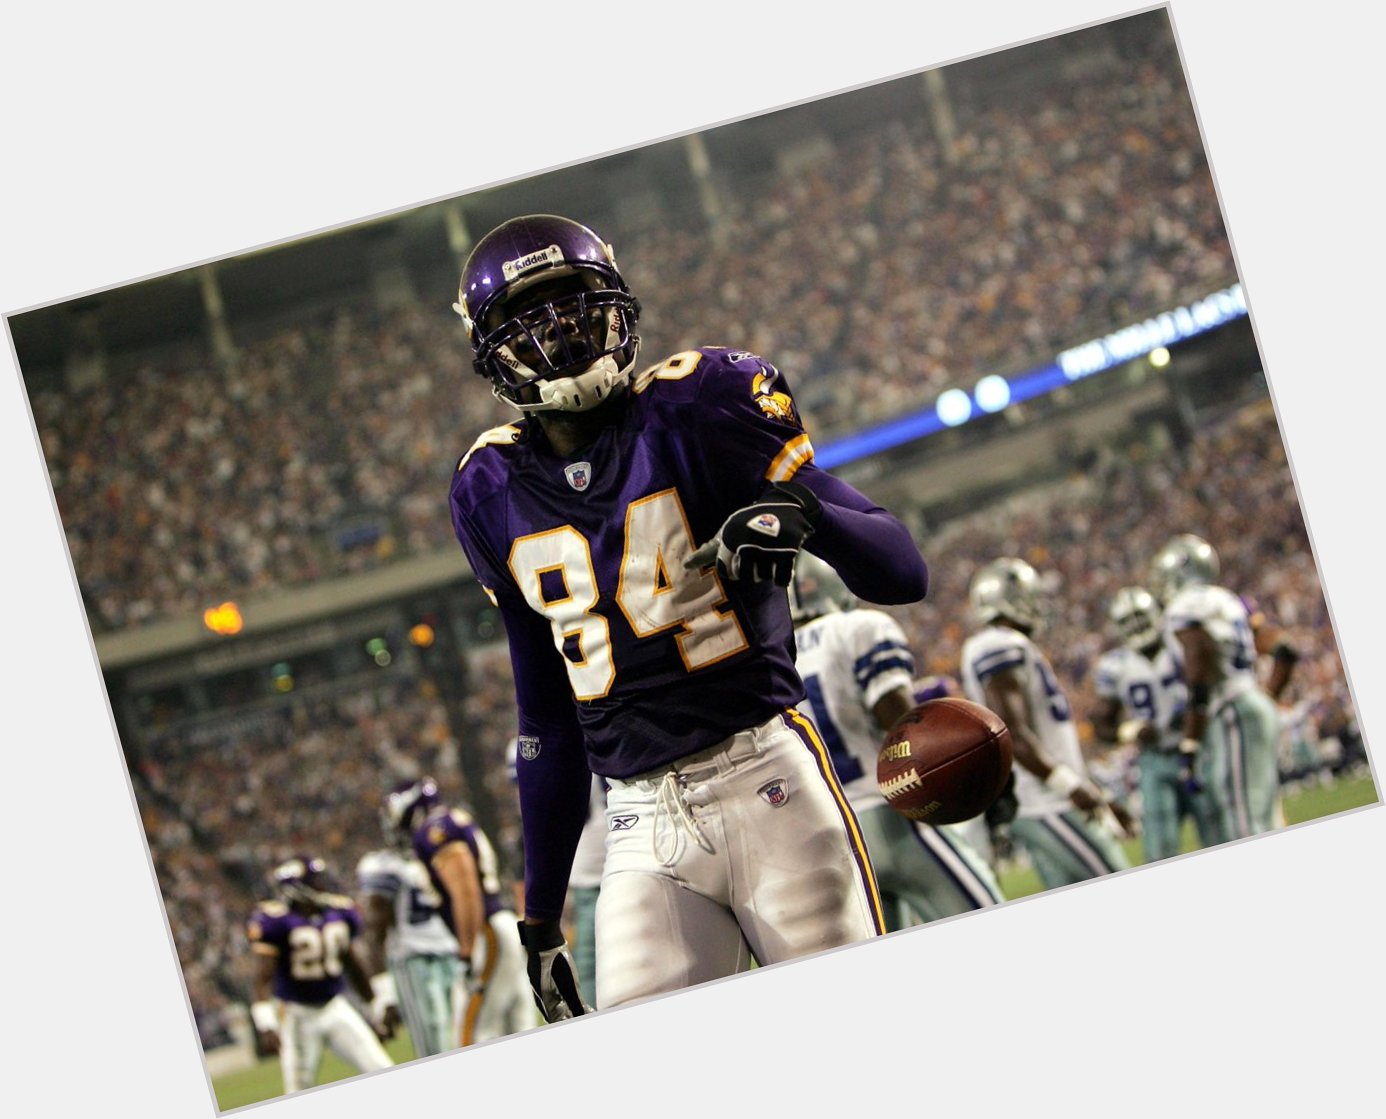   Happy Birthday to one of the best receivers of all-time...RANDY MOSS! 